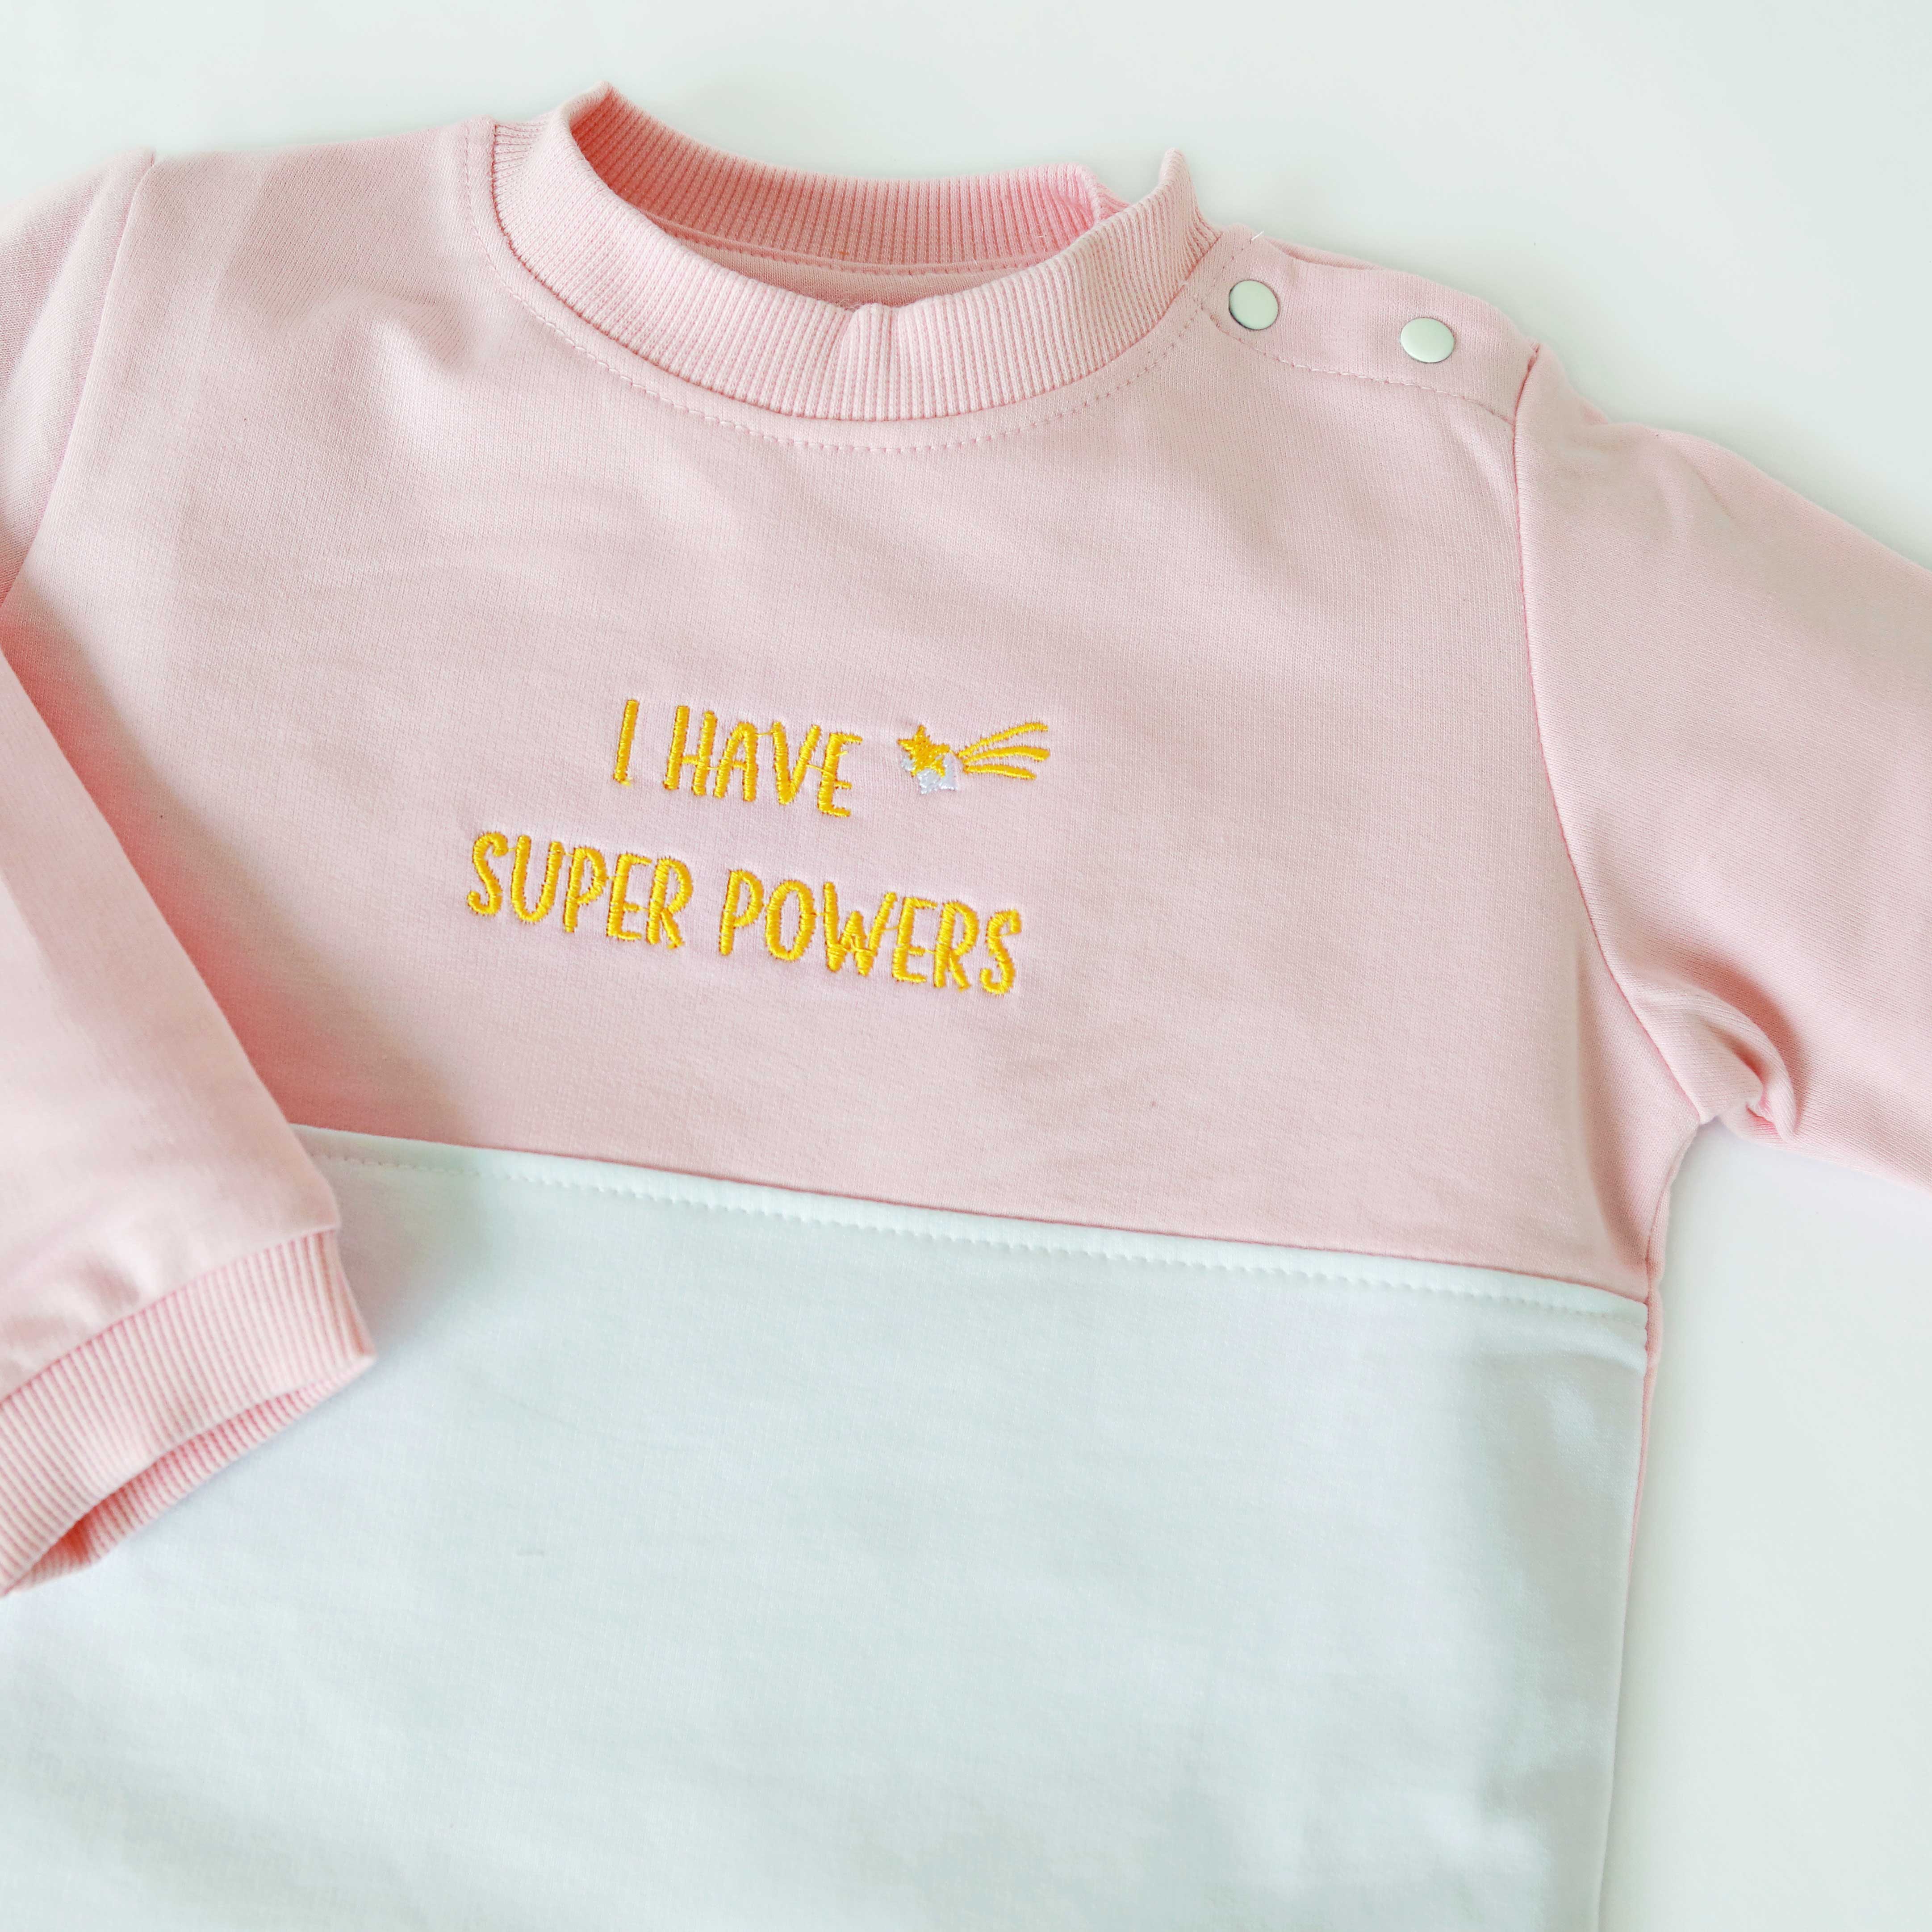 Super Powers - Full Sleeve Top and Pant ( 0 - 4 years ) 1 Pack